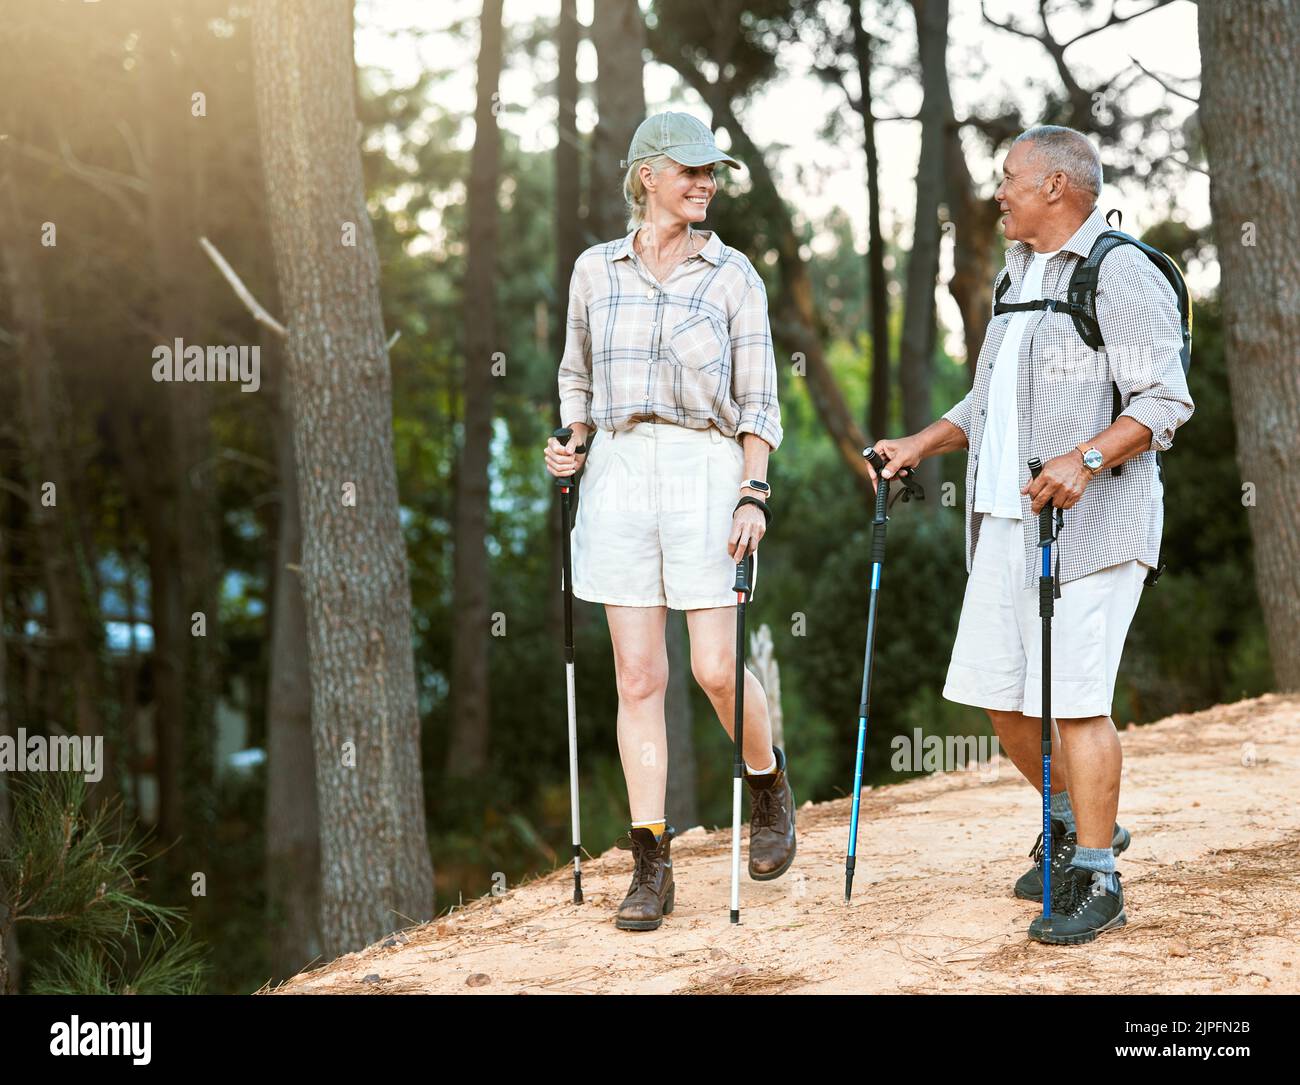 Hiking, adventure and exploring with a senior couple or friends having fun, exercising and enjoying the outdoors. Walking, discovering and journey Stock Photo